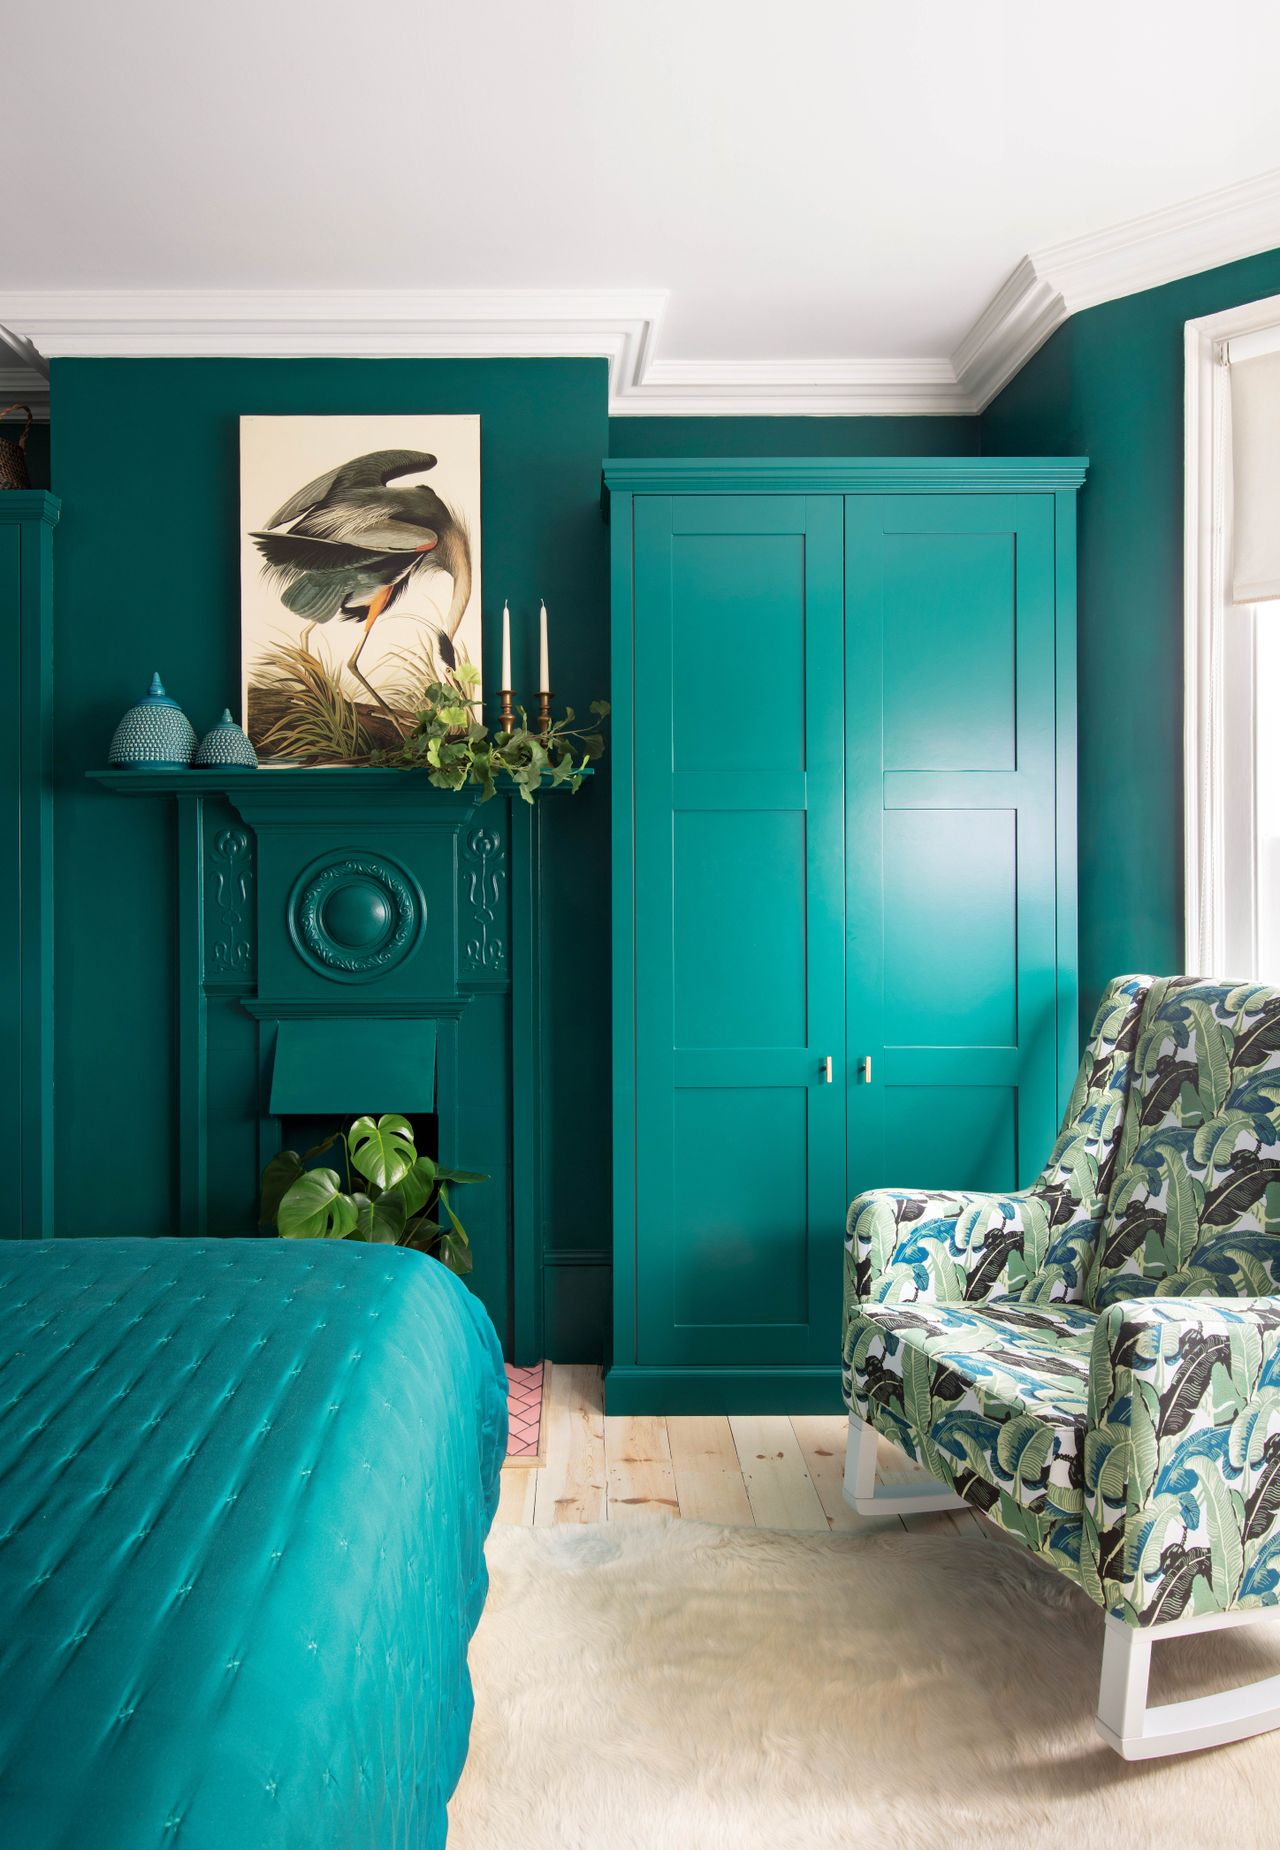 Teal Bedroom Ideas 12 Designs To Best Use This Green And Blue Hue Real Homes